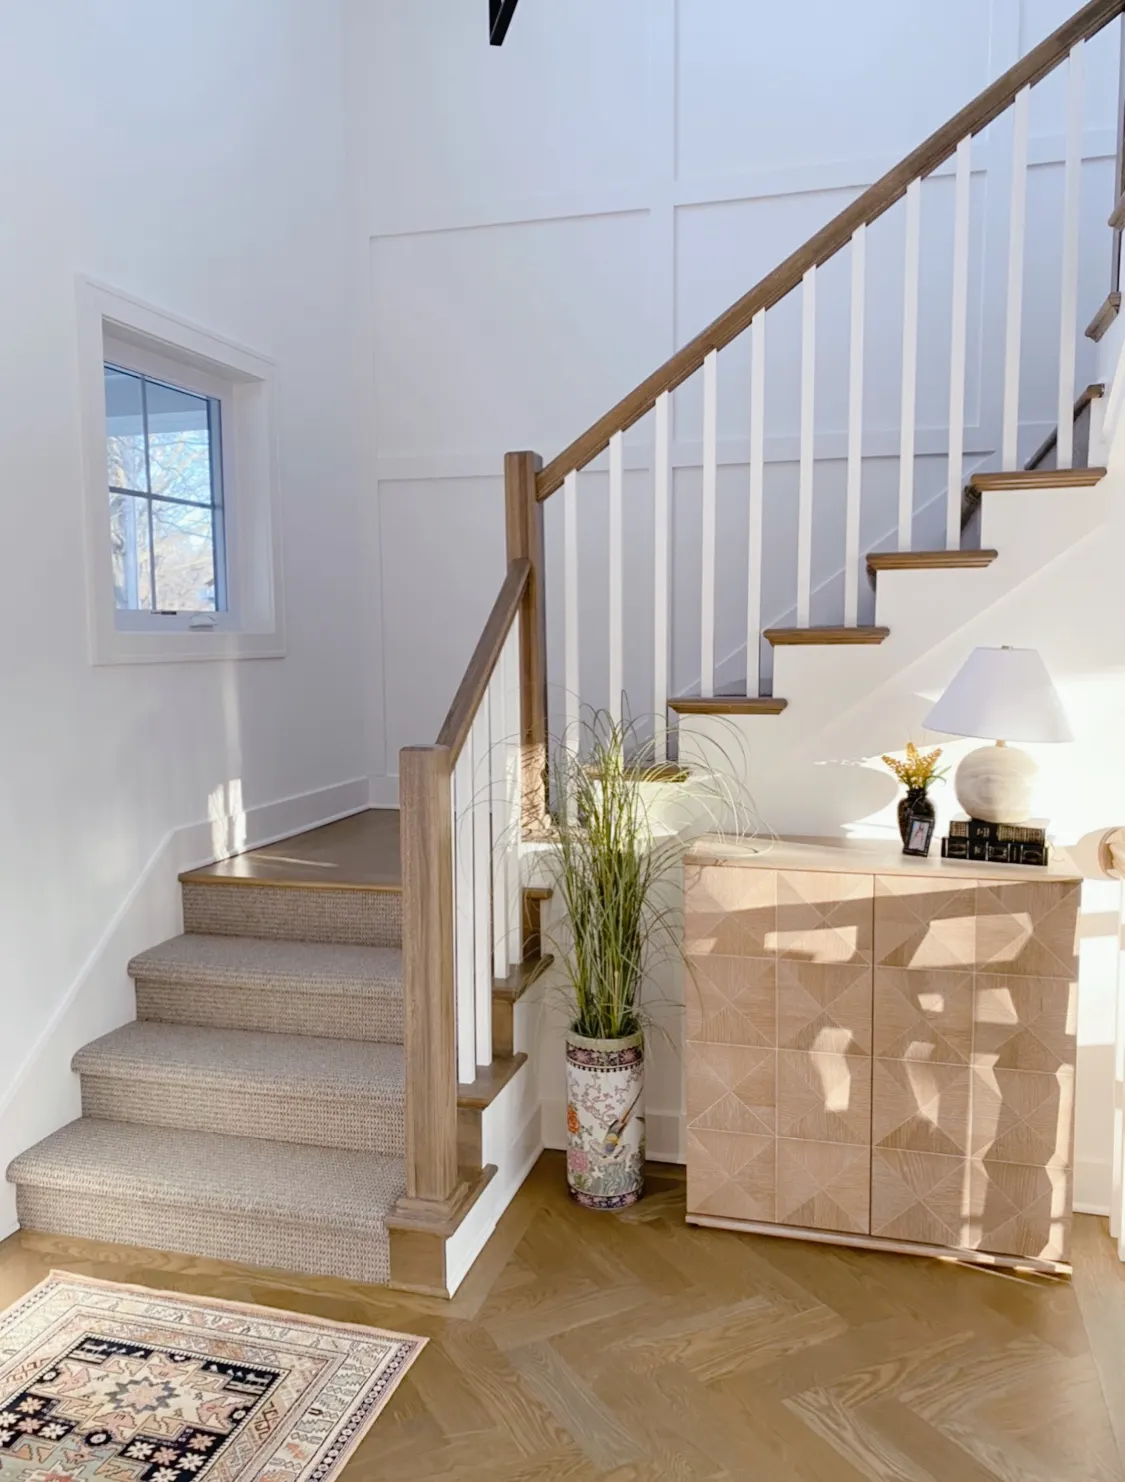 Stairwell with console table and lamp